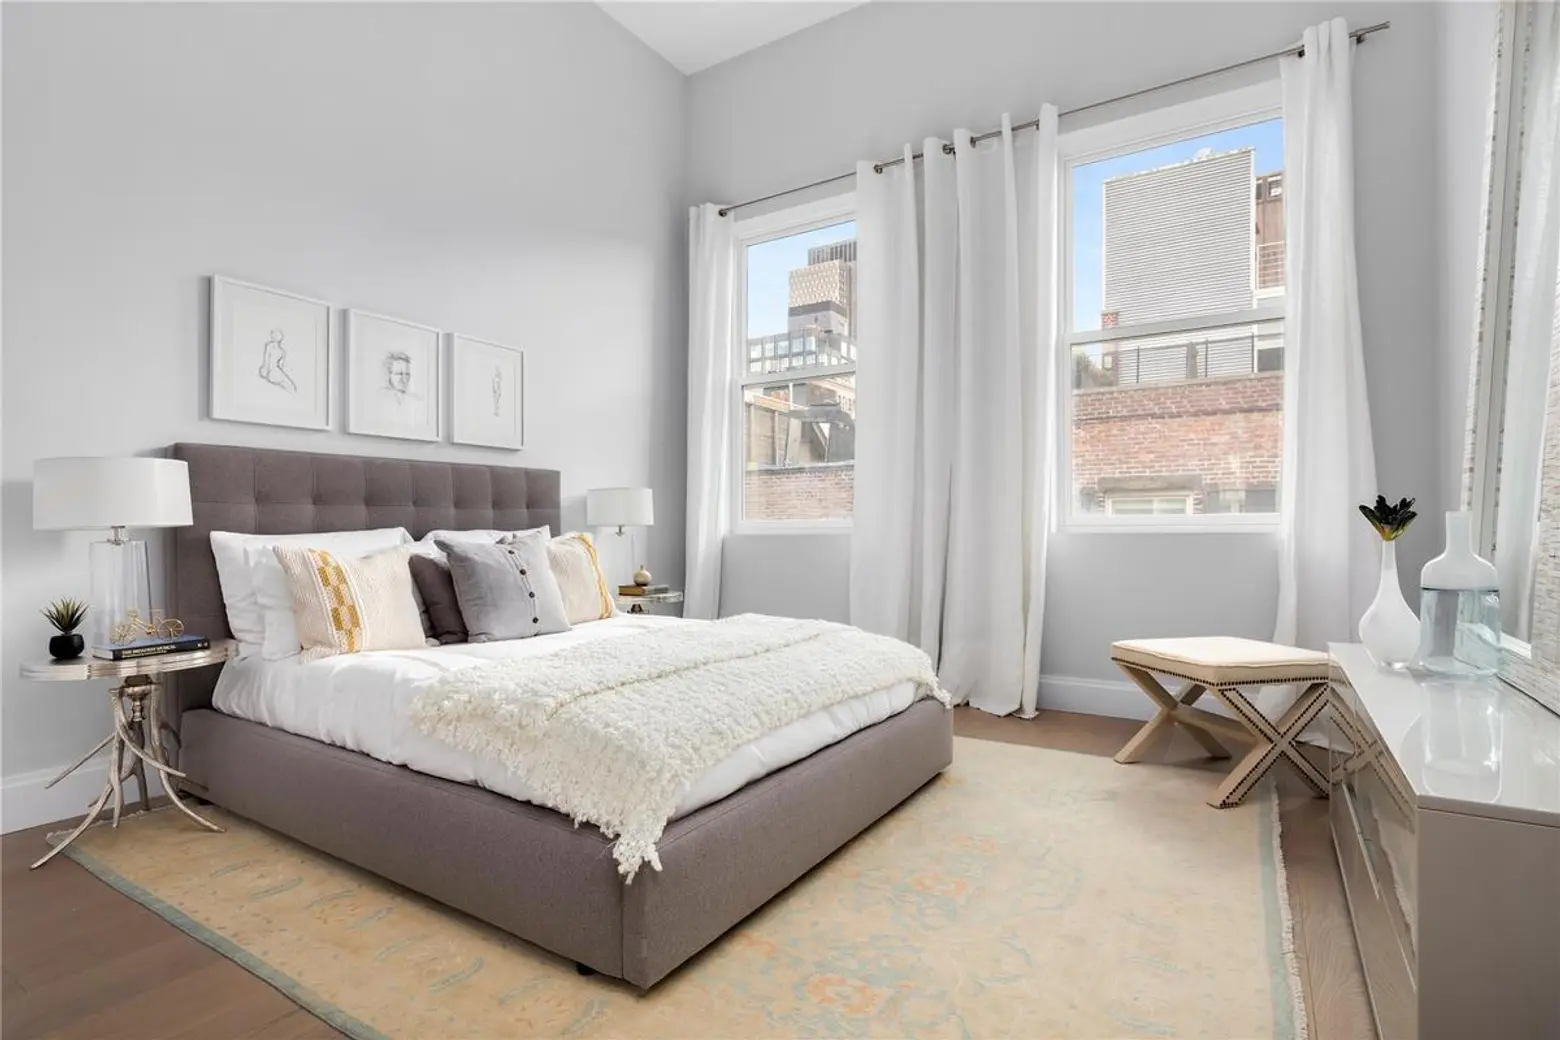 42 Lispenard Street, Pearl Paint, 308 canal Street, Duplexes, Rooftop Spaces, Outdoor Spaces, Penthouse, Loft, Tribeca,